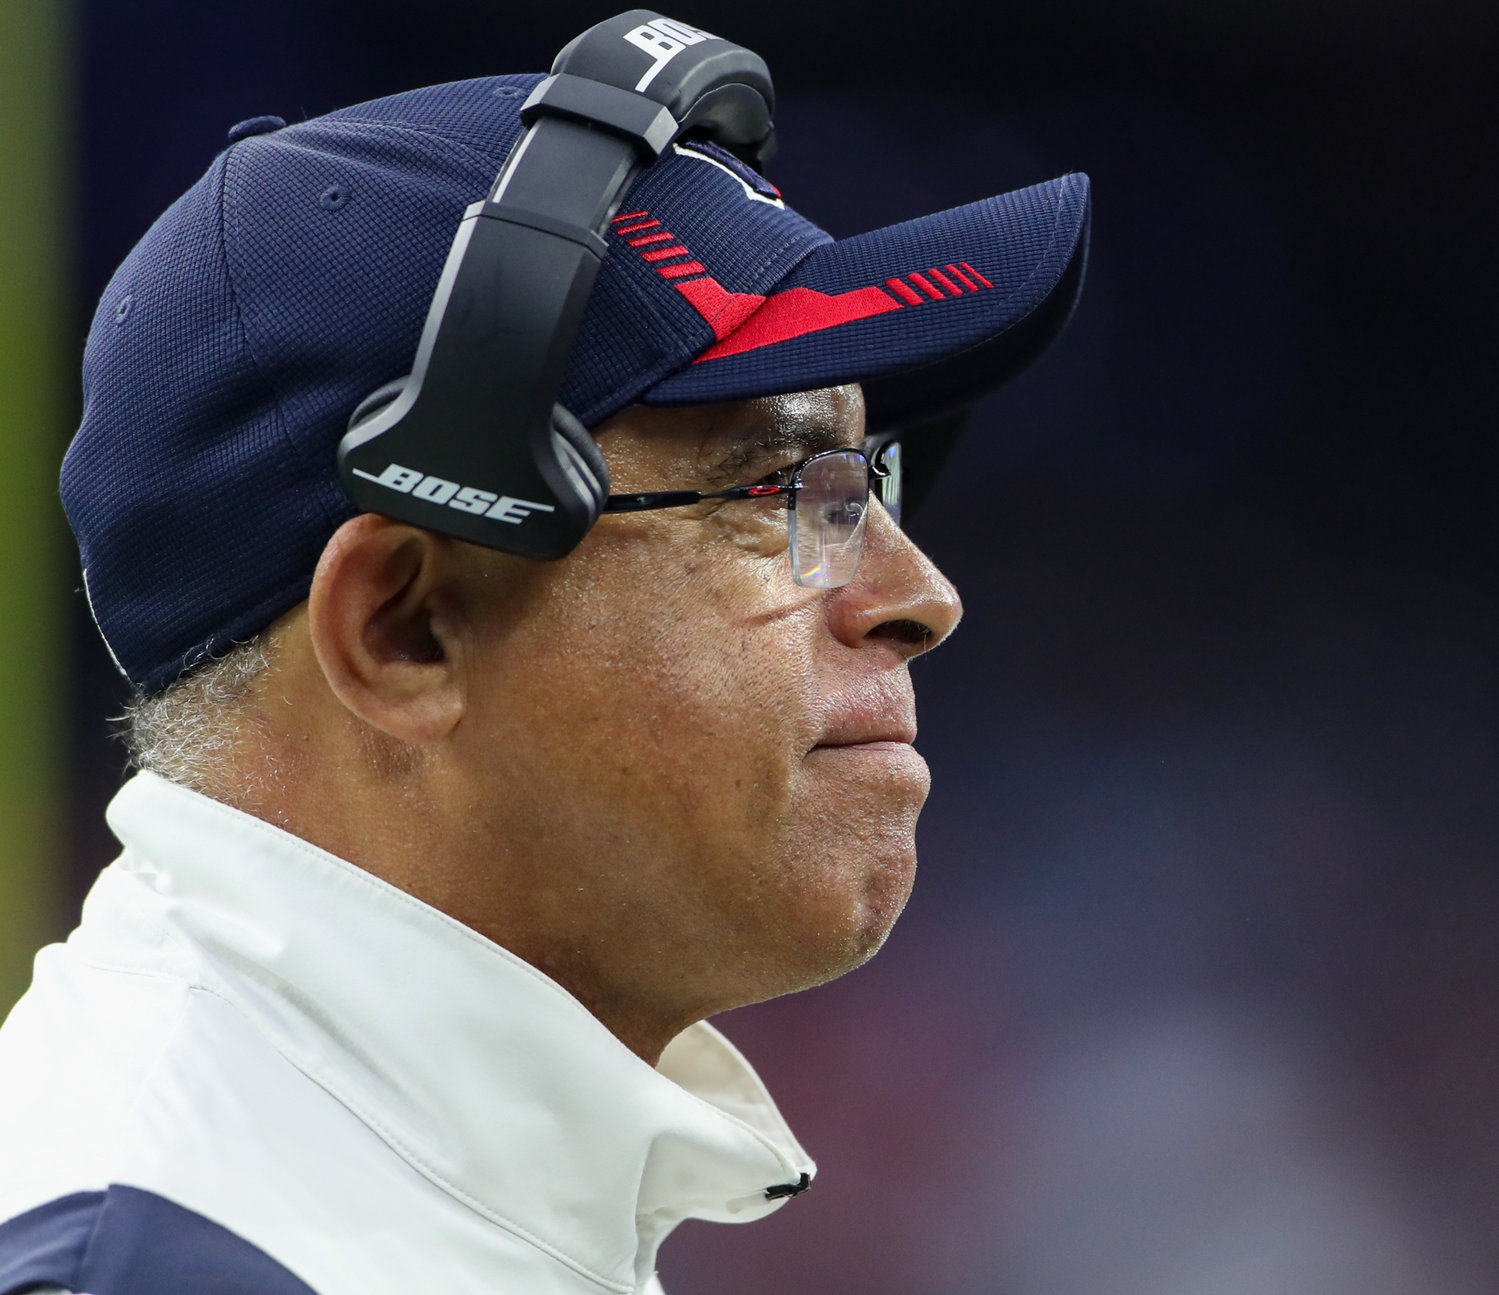 Houston Texans head coach David Culley during an NFL game between the Texans and the Titans on Jan. 9, 2022 in Houston, Texas. The Titans won, 28-25.